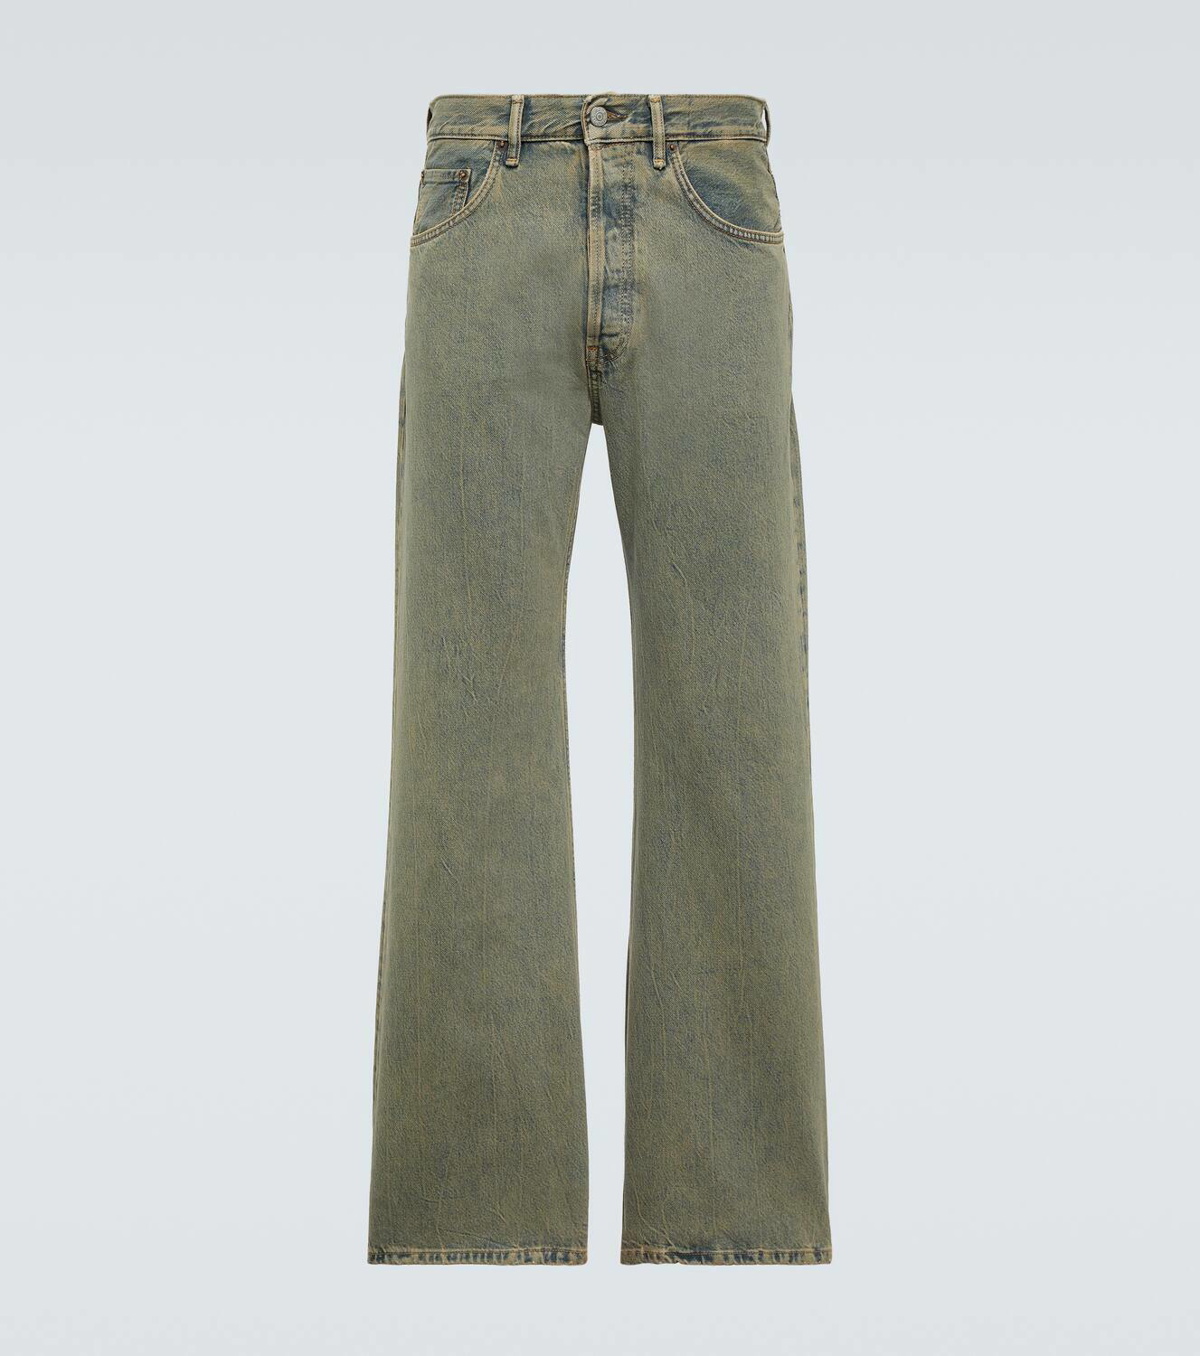 Acne Studios Mid-rise straight jeans